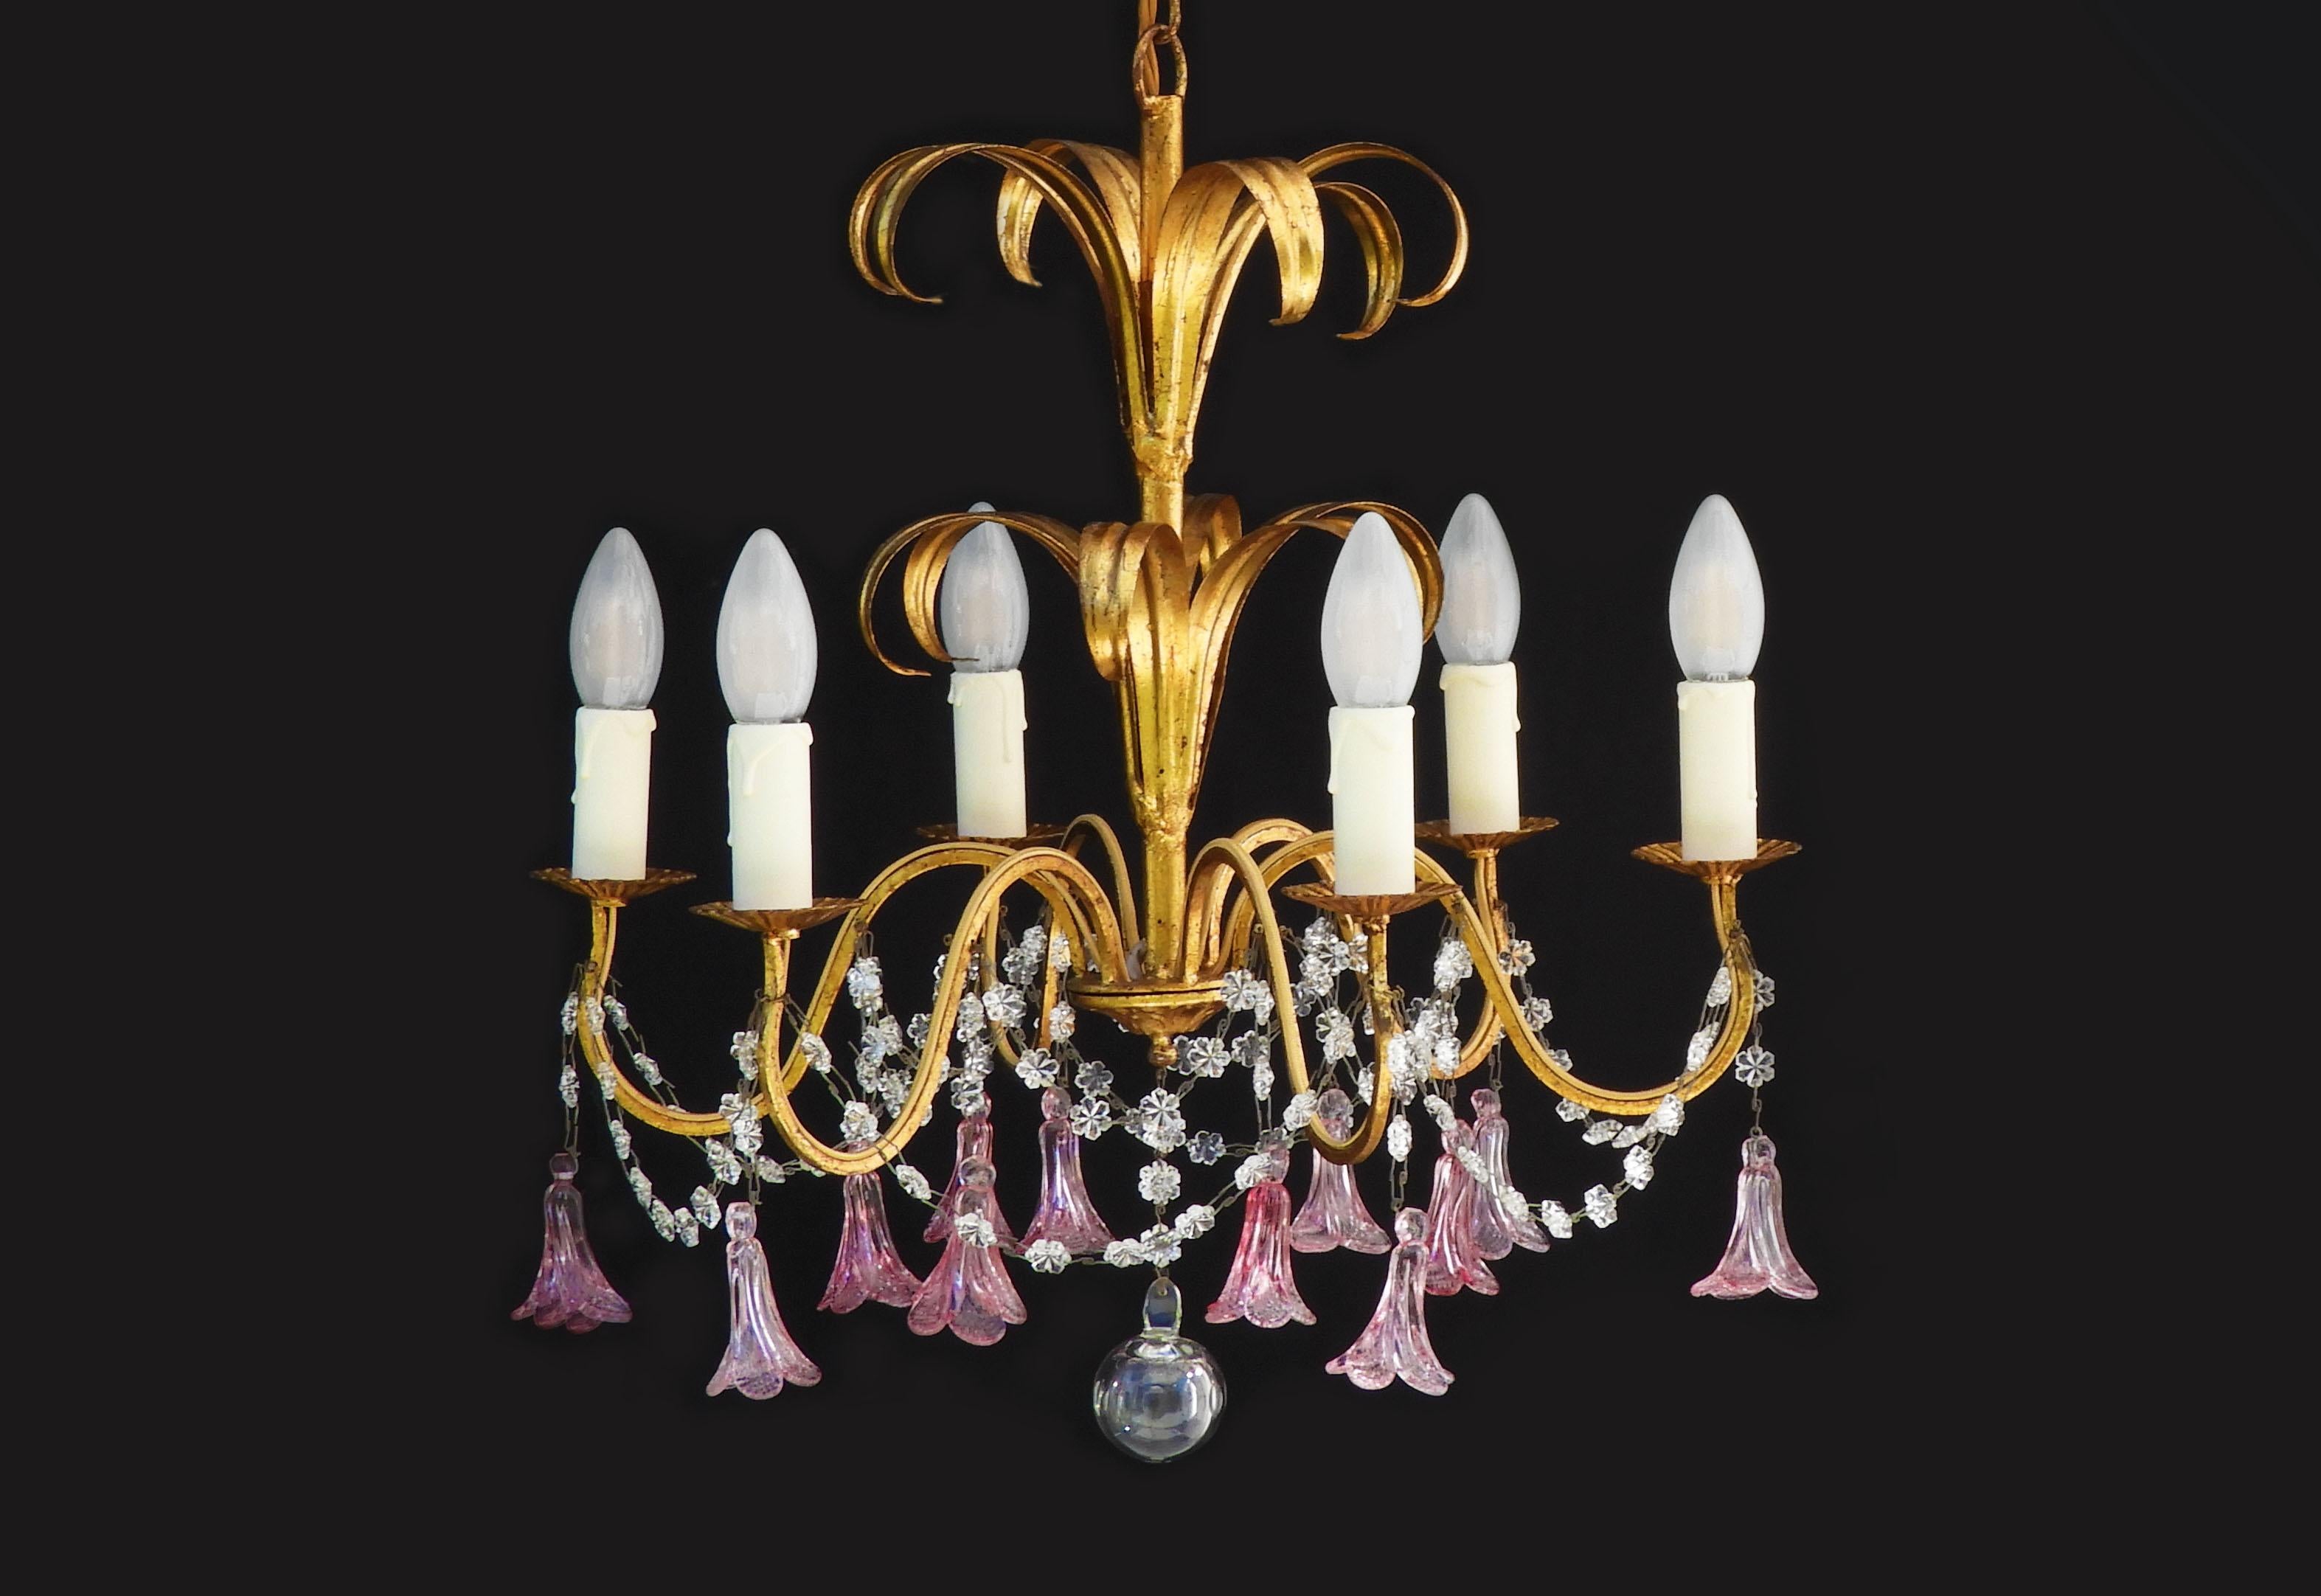 Metal French 6 Light Chandelier C1950, Pink Flower Pendant Drops And Gilded Tôle